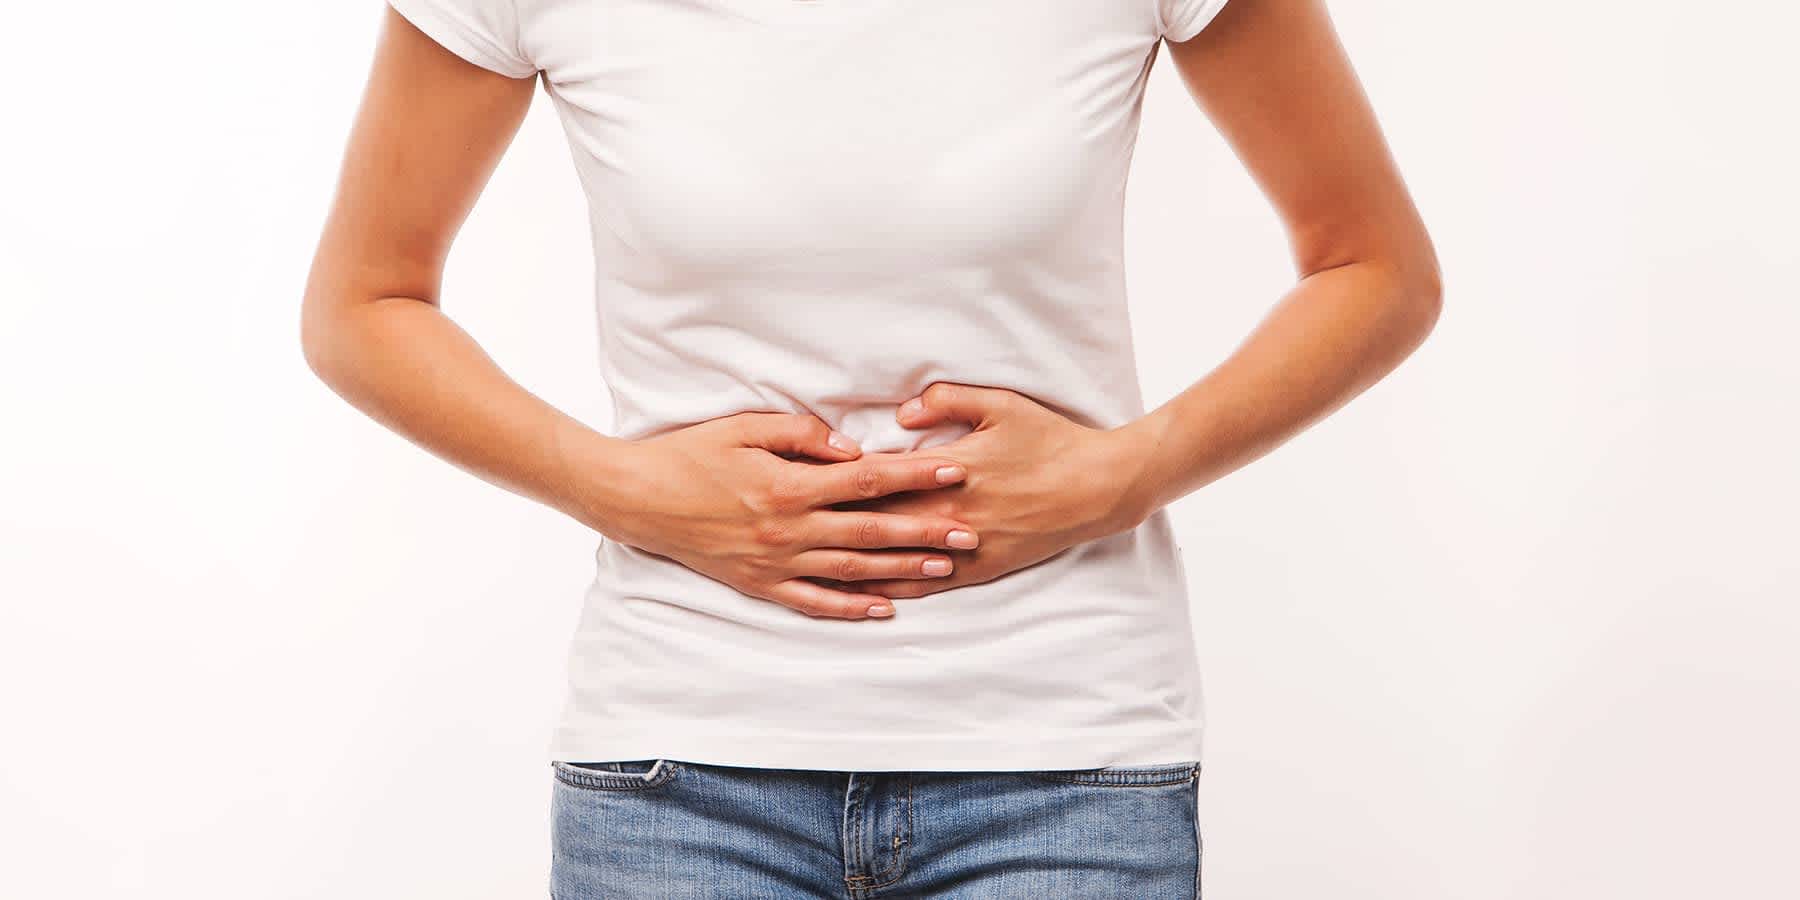 Woman in white shirt with her hands over her abdomen experiencing symptoms of untreated chlamydia